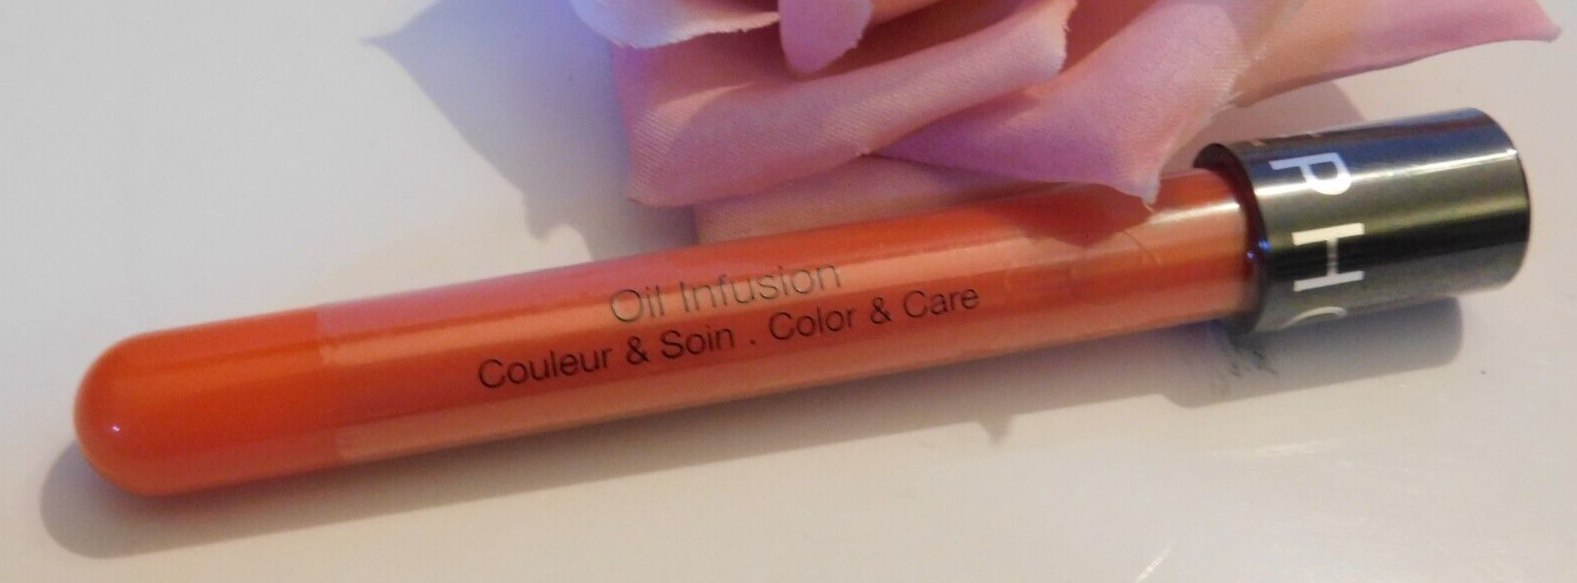 Primary image for Sephora Oil Infusion Lip Color in Tangerine Fizz BRAND NEW